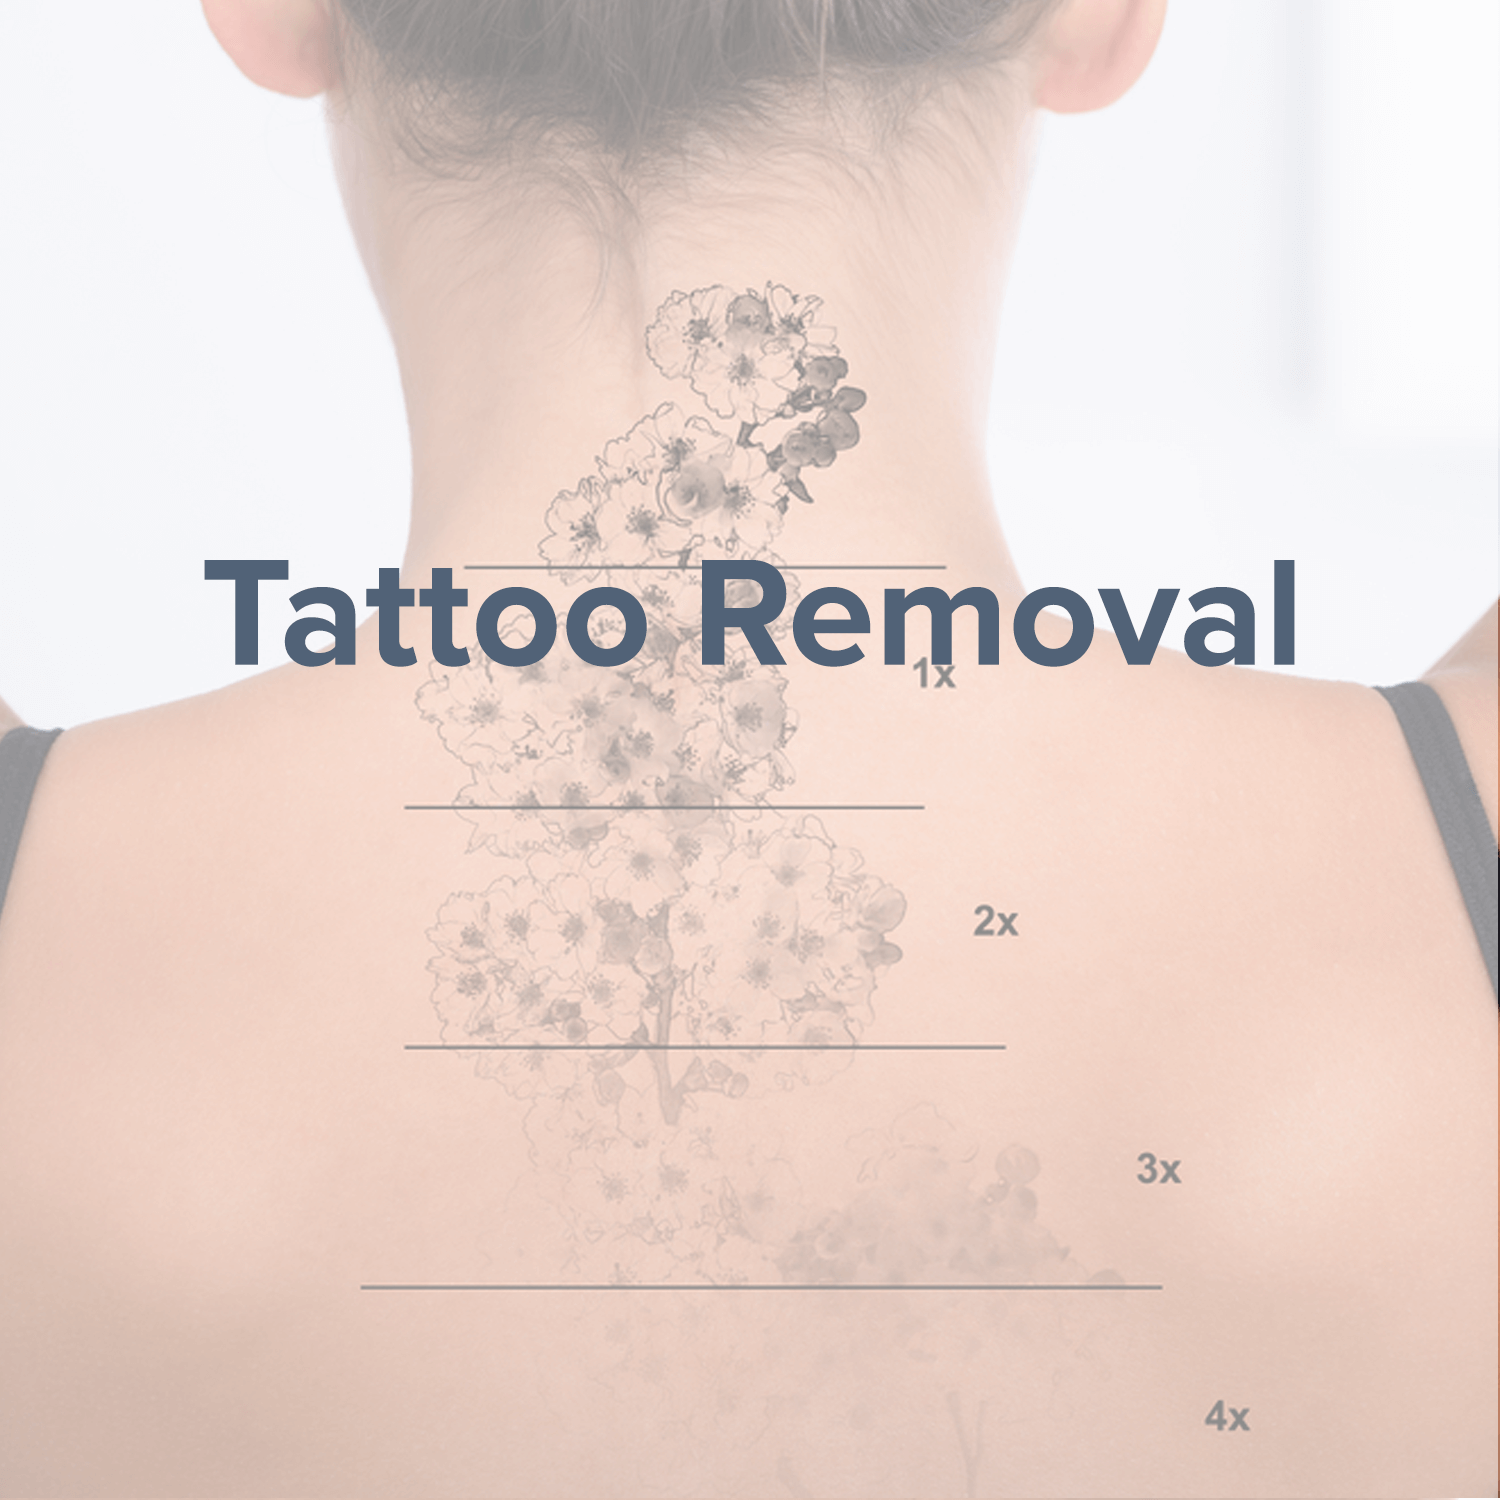 tattoo-removal.png